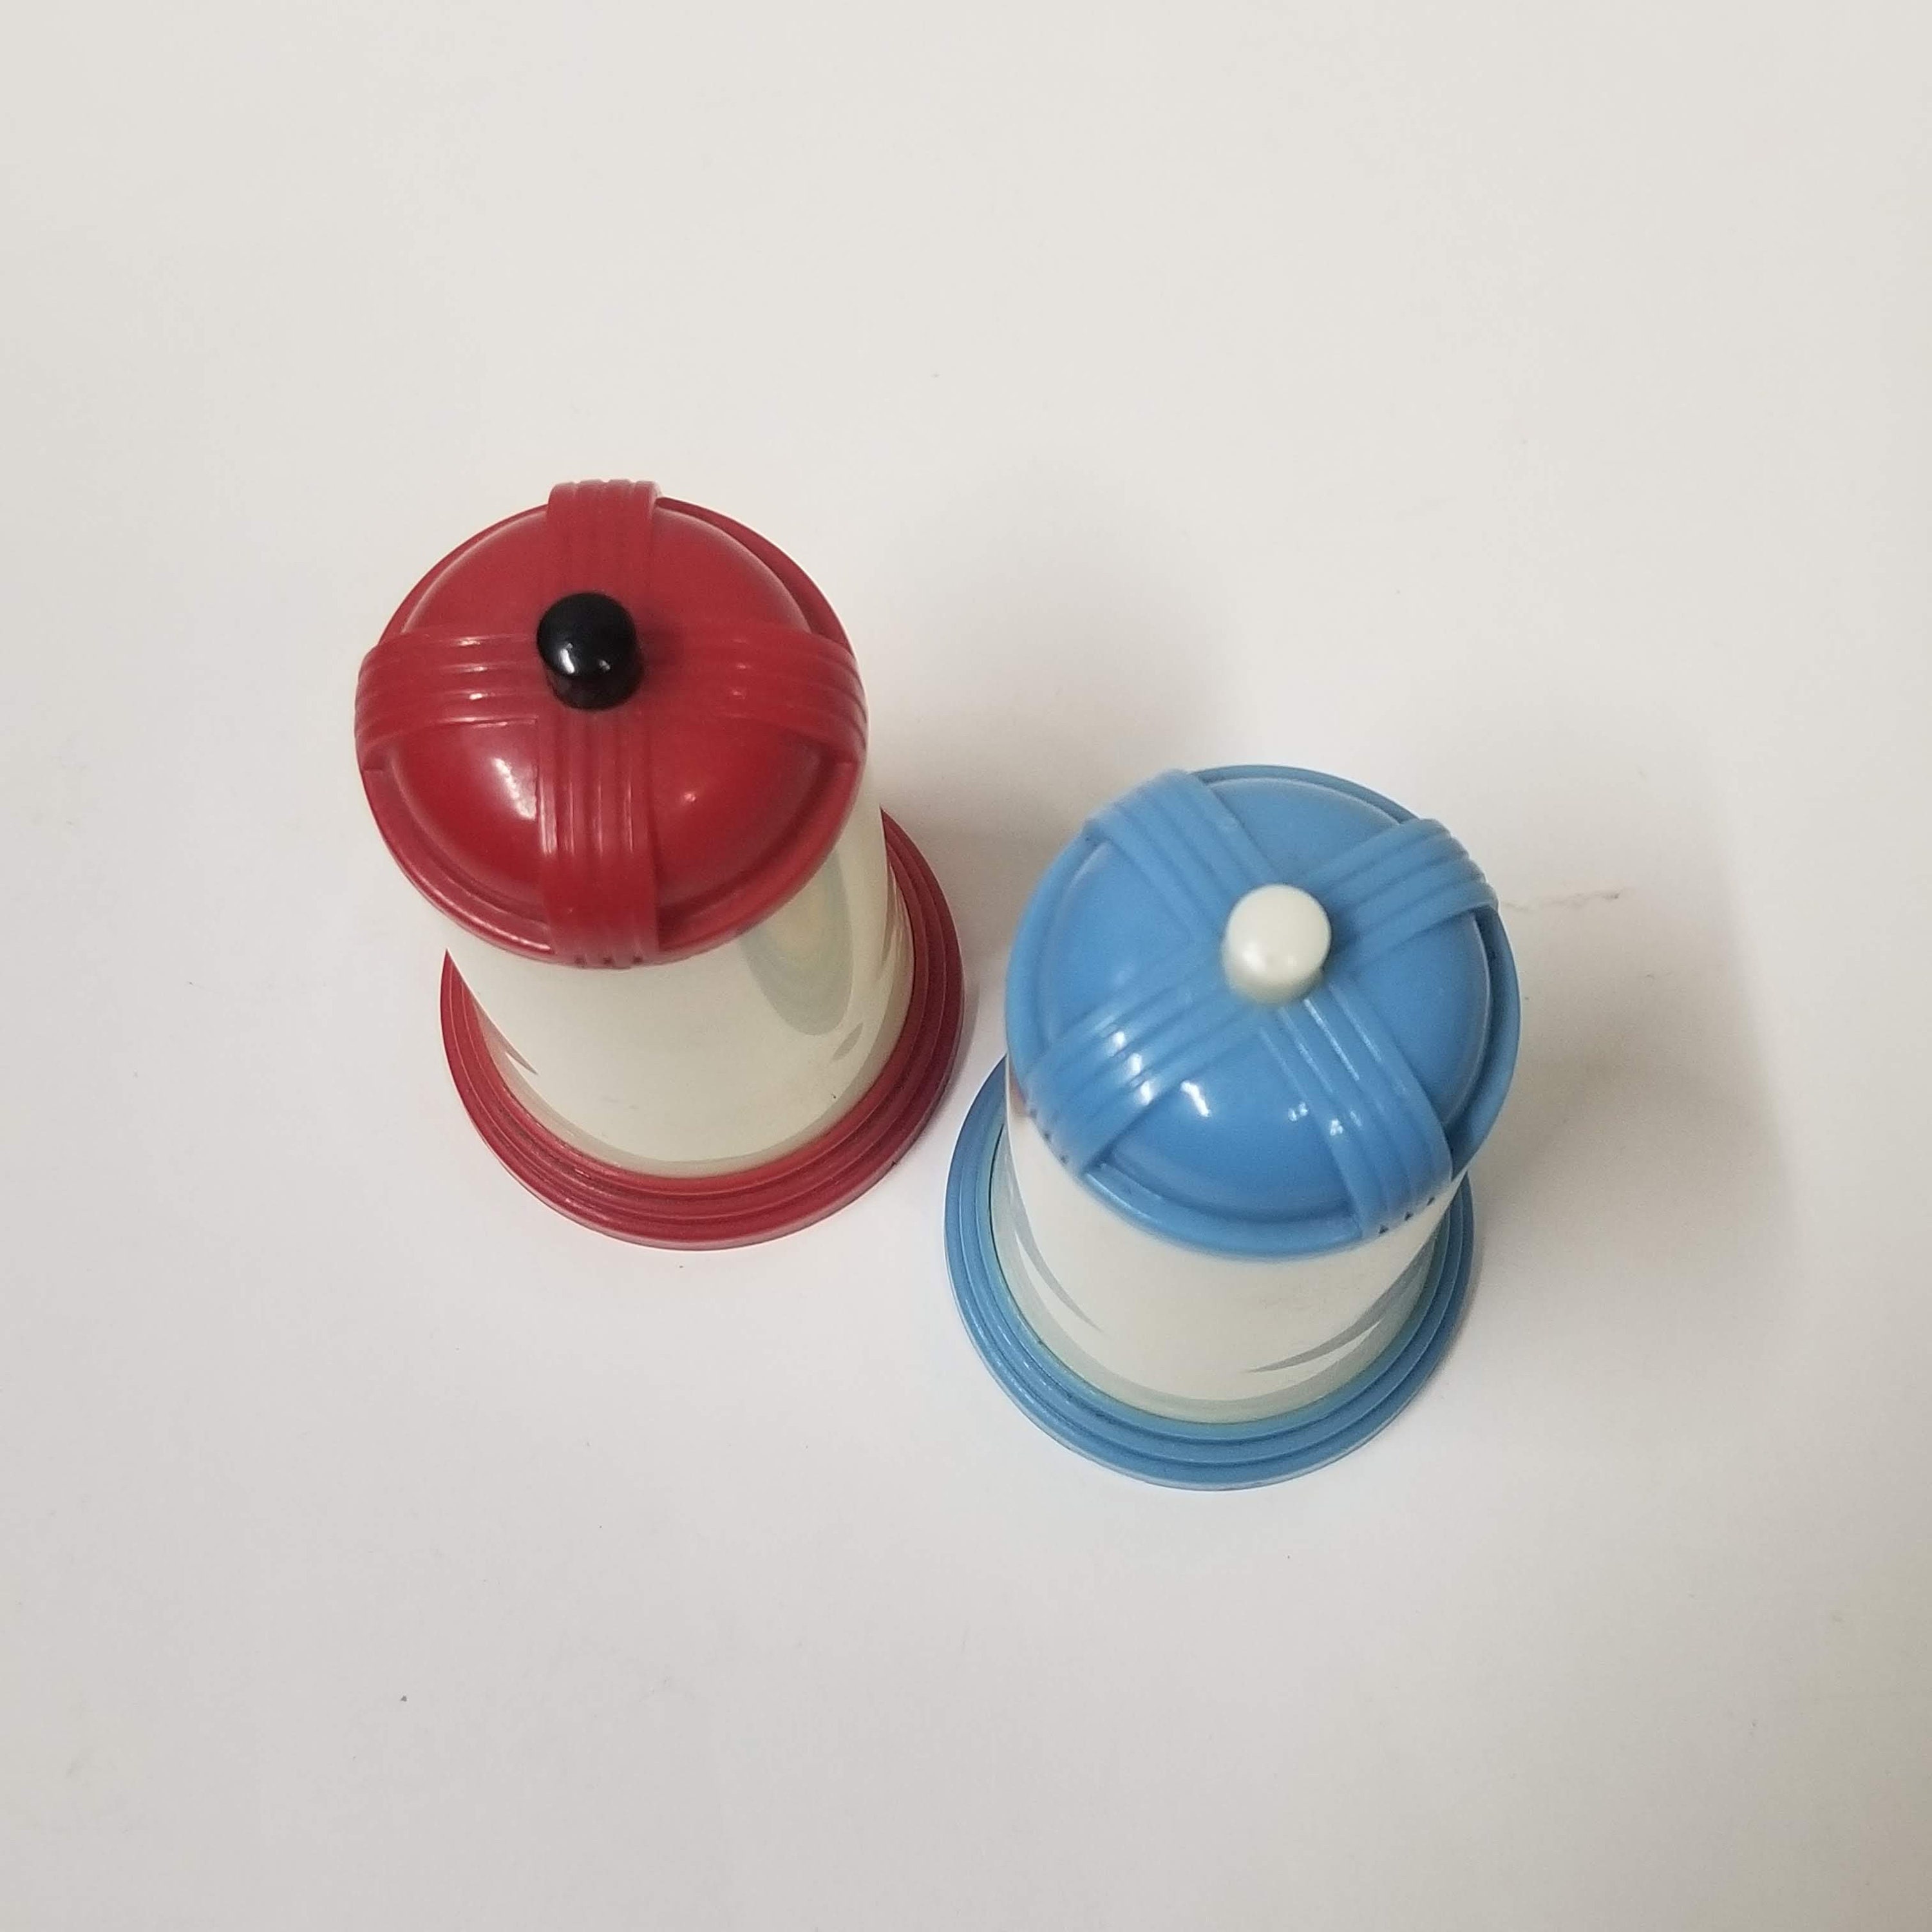 Salt and Pepper Shaker Push Button Set Vintage 1940s Red Blue pic